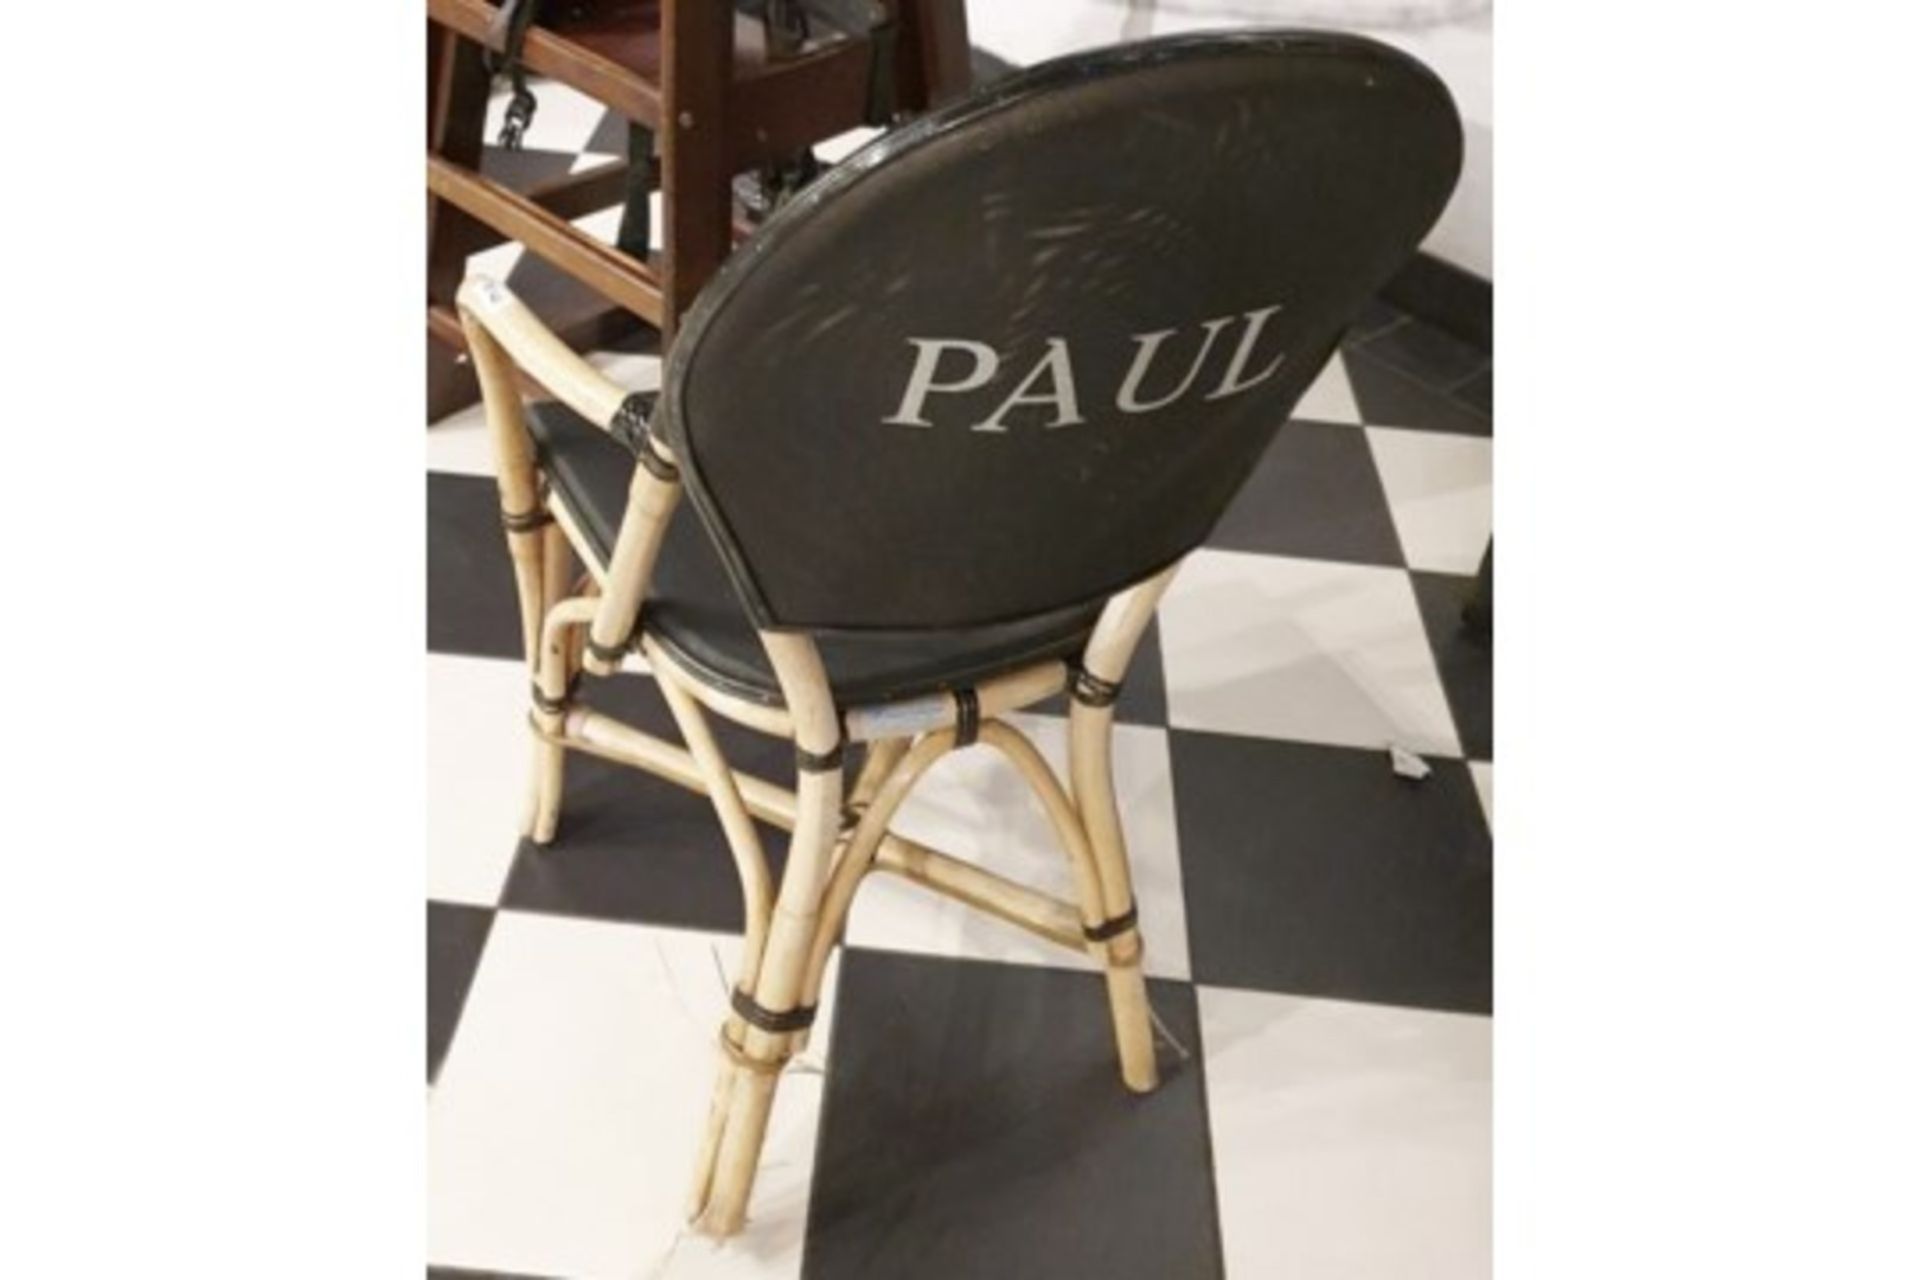 2 x Bamboo Studio Chair With Black Seat and Back Rest - Features the Name 'PAUL' Printed on the Back - Image 5 of 6